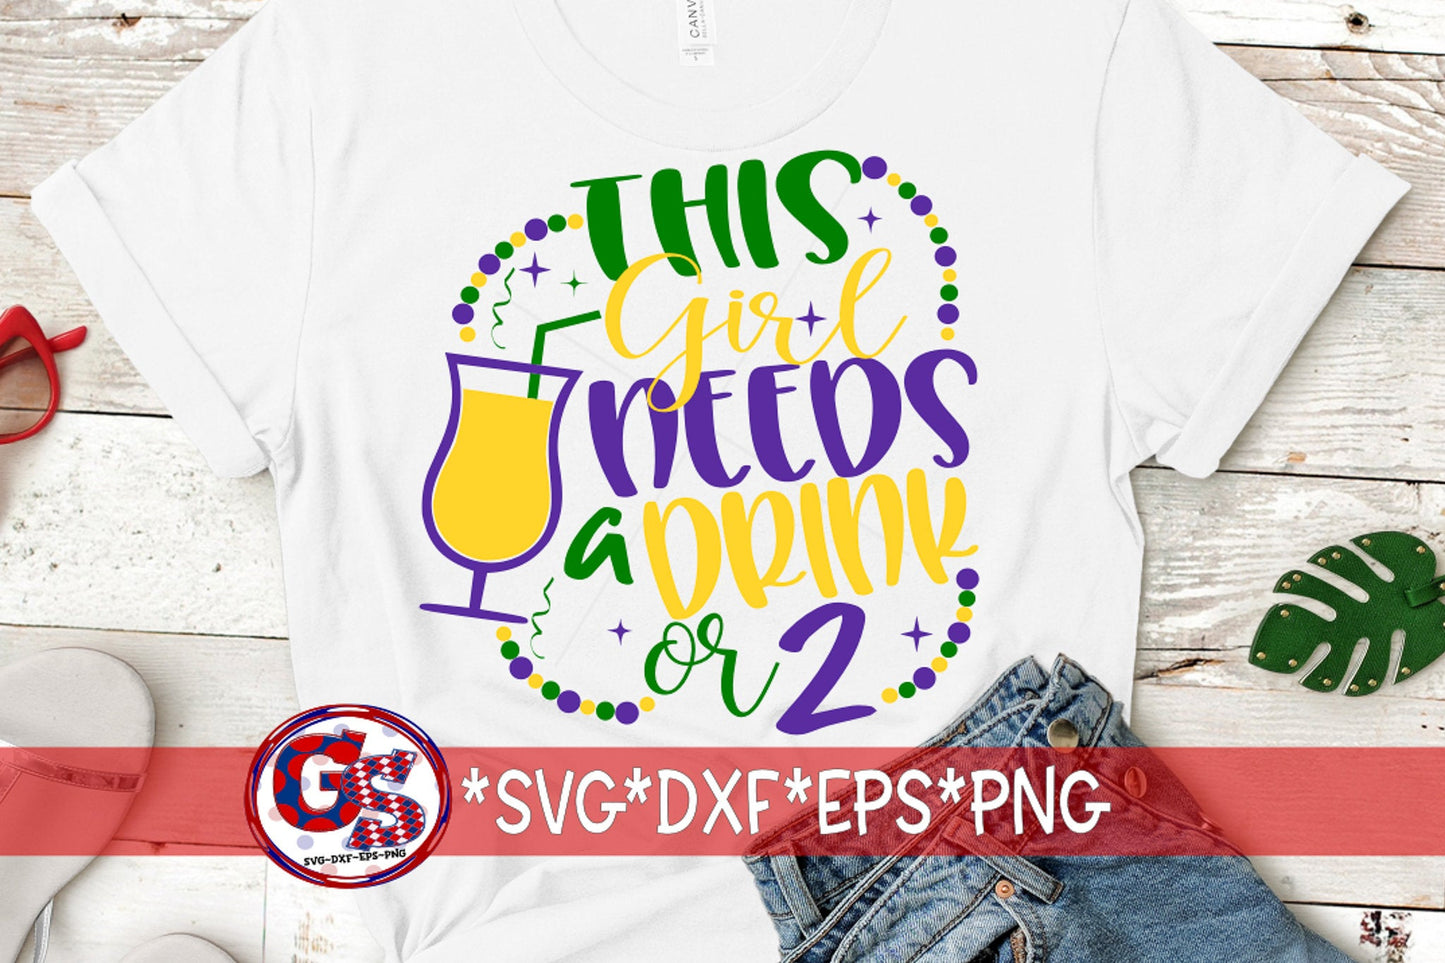 Mardi Gras SvG | This Girl Needs A Drink Or Two svg dxf eps png | Mardi Gras SvG | This Girl Needs a Drink SvG | Instant Download Cut File